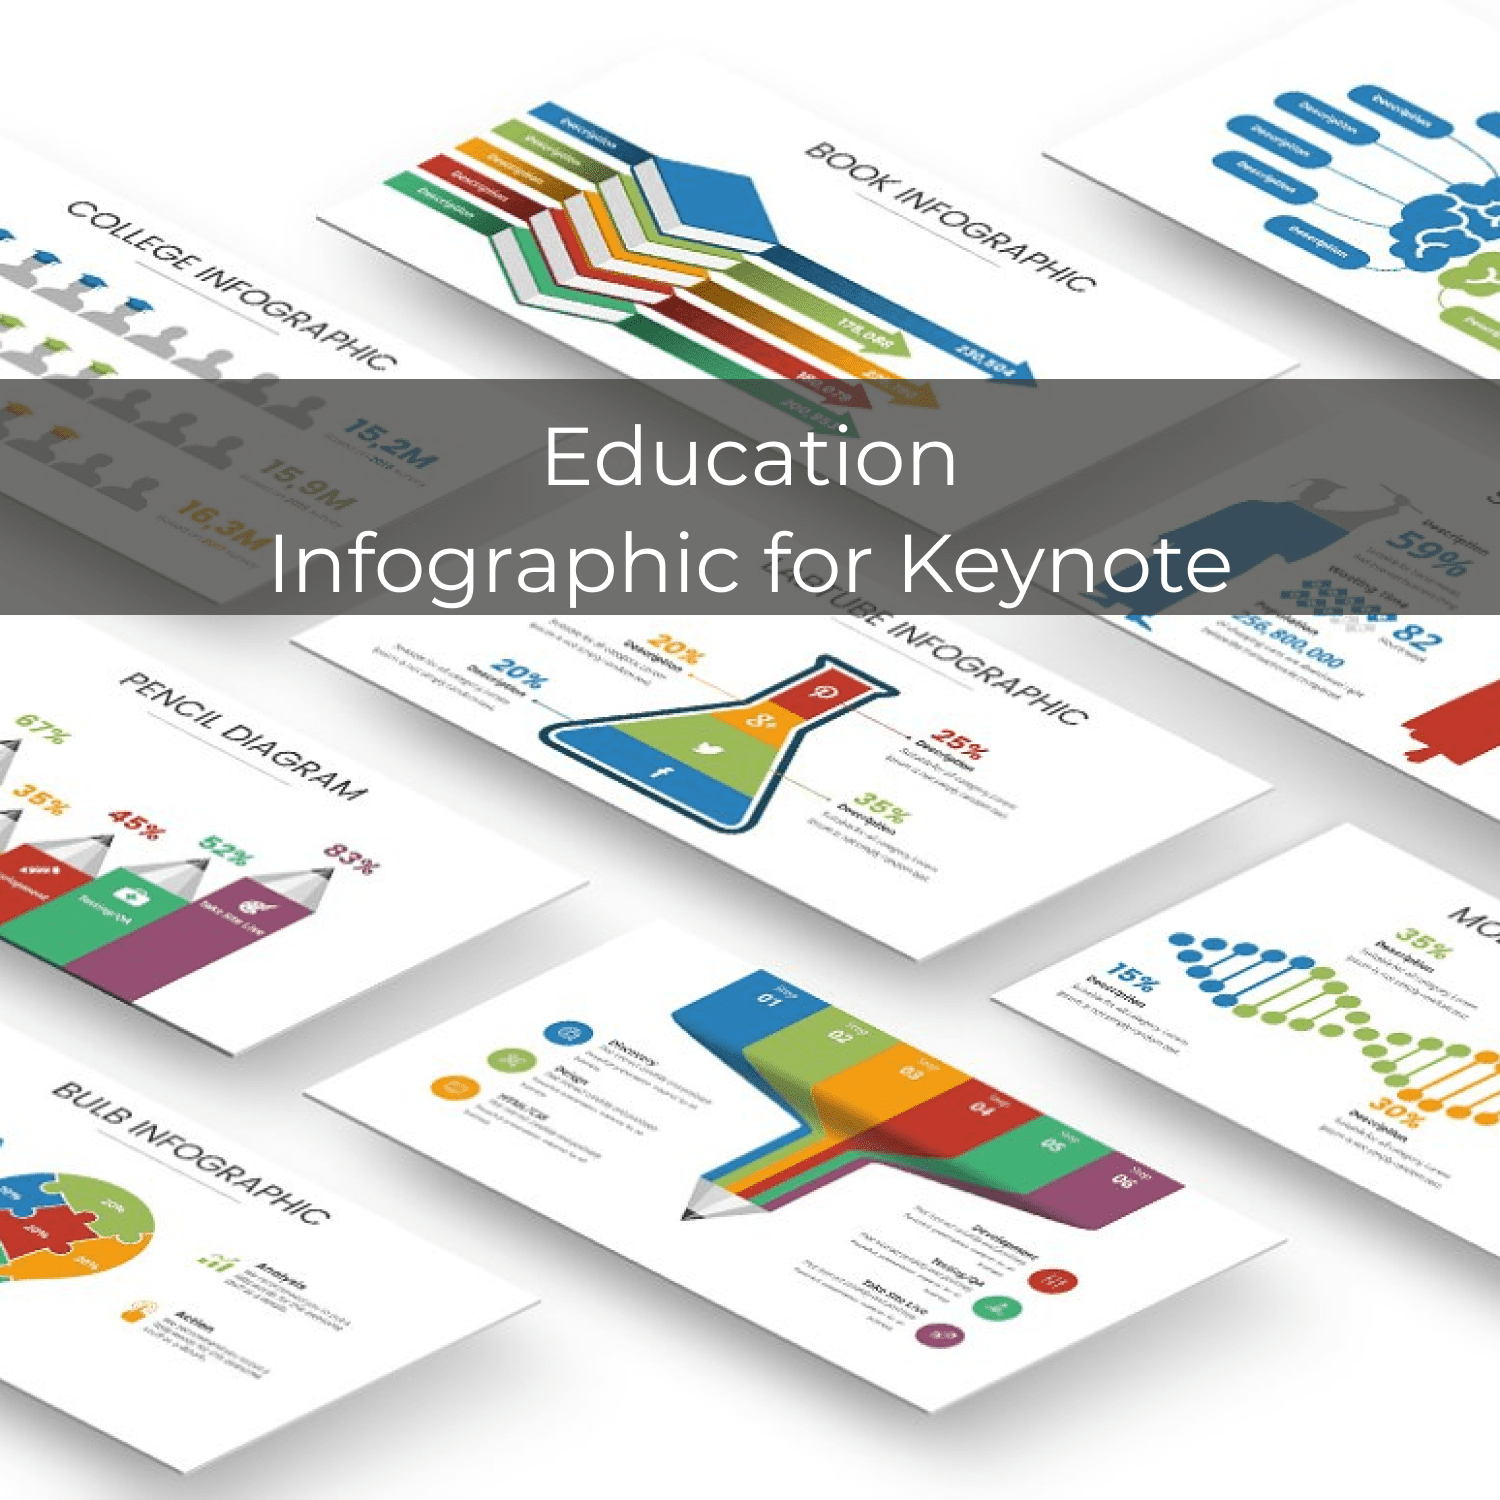 Education Infographic for Keynote cover.